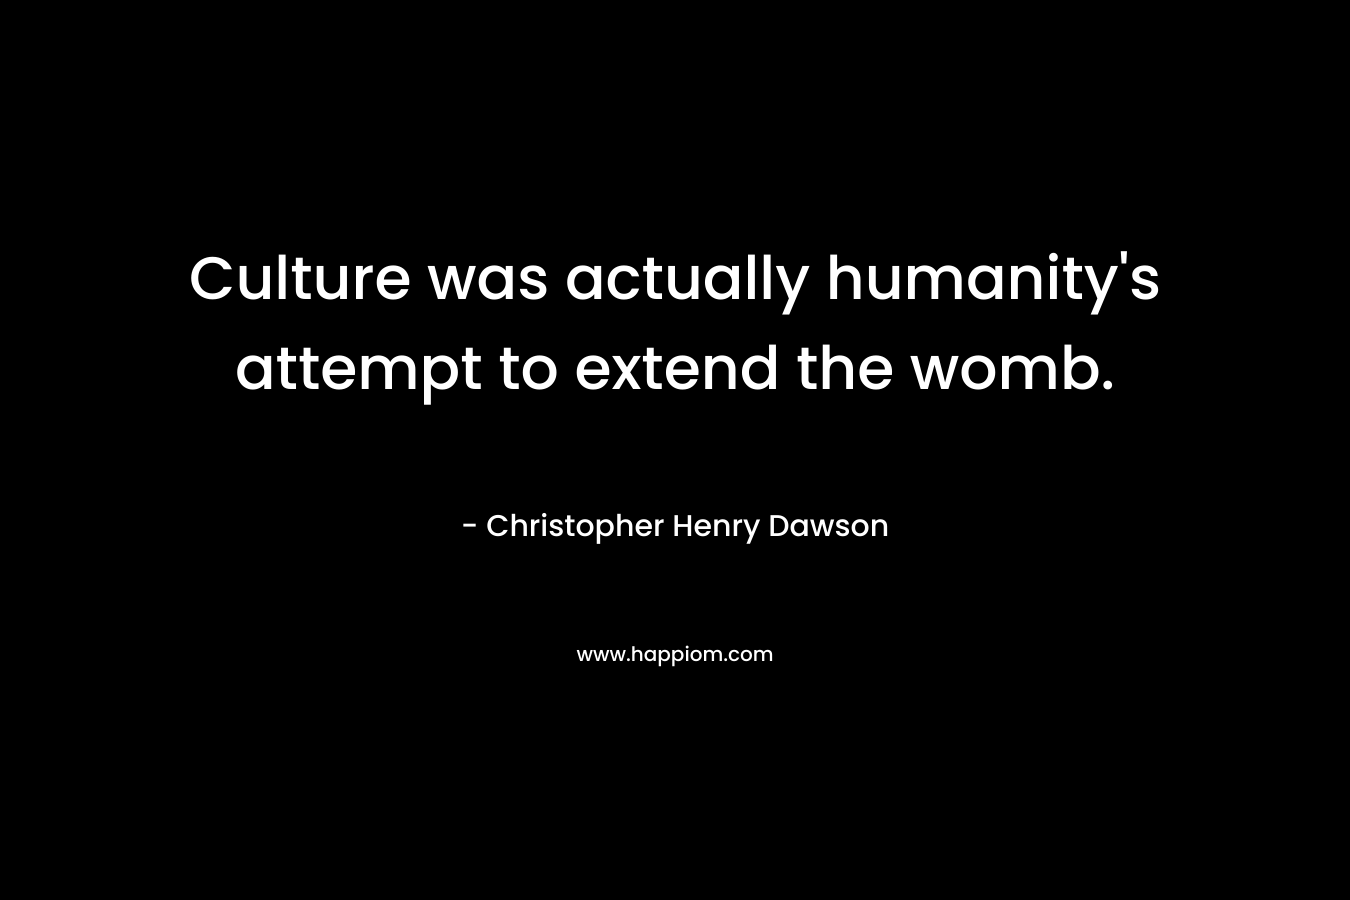 Culture was actually humanity’s attempt to extend the womb. – Christopher Henry Dawson